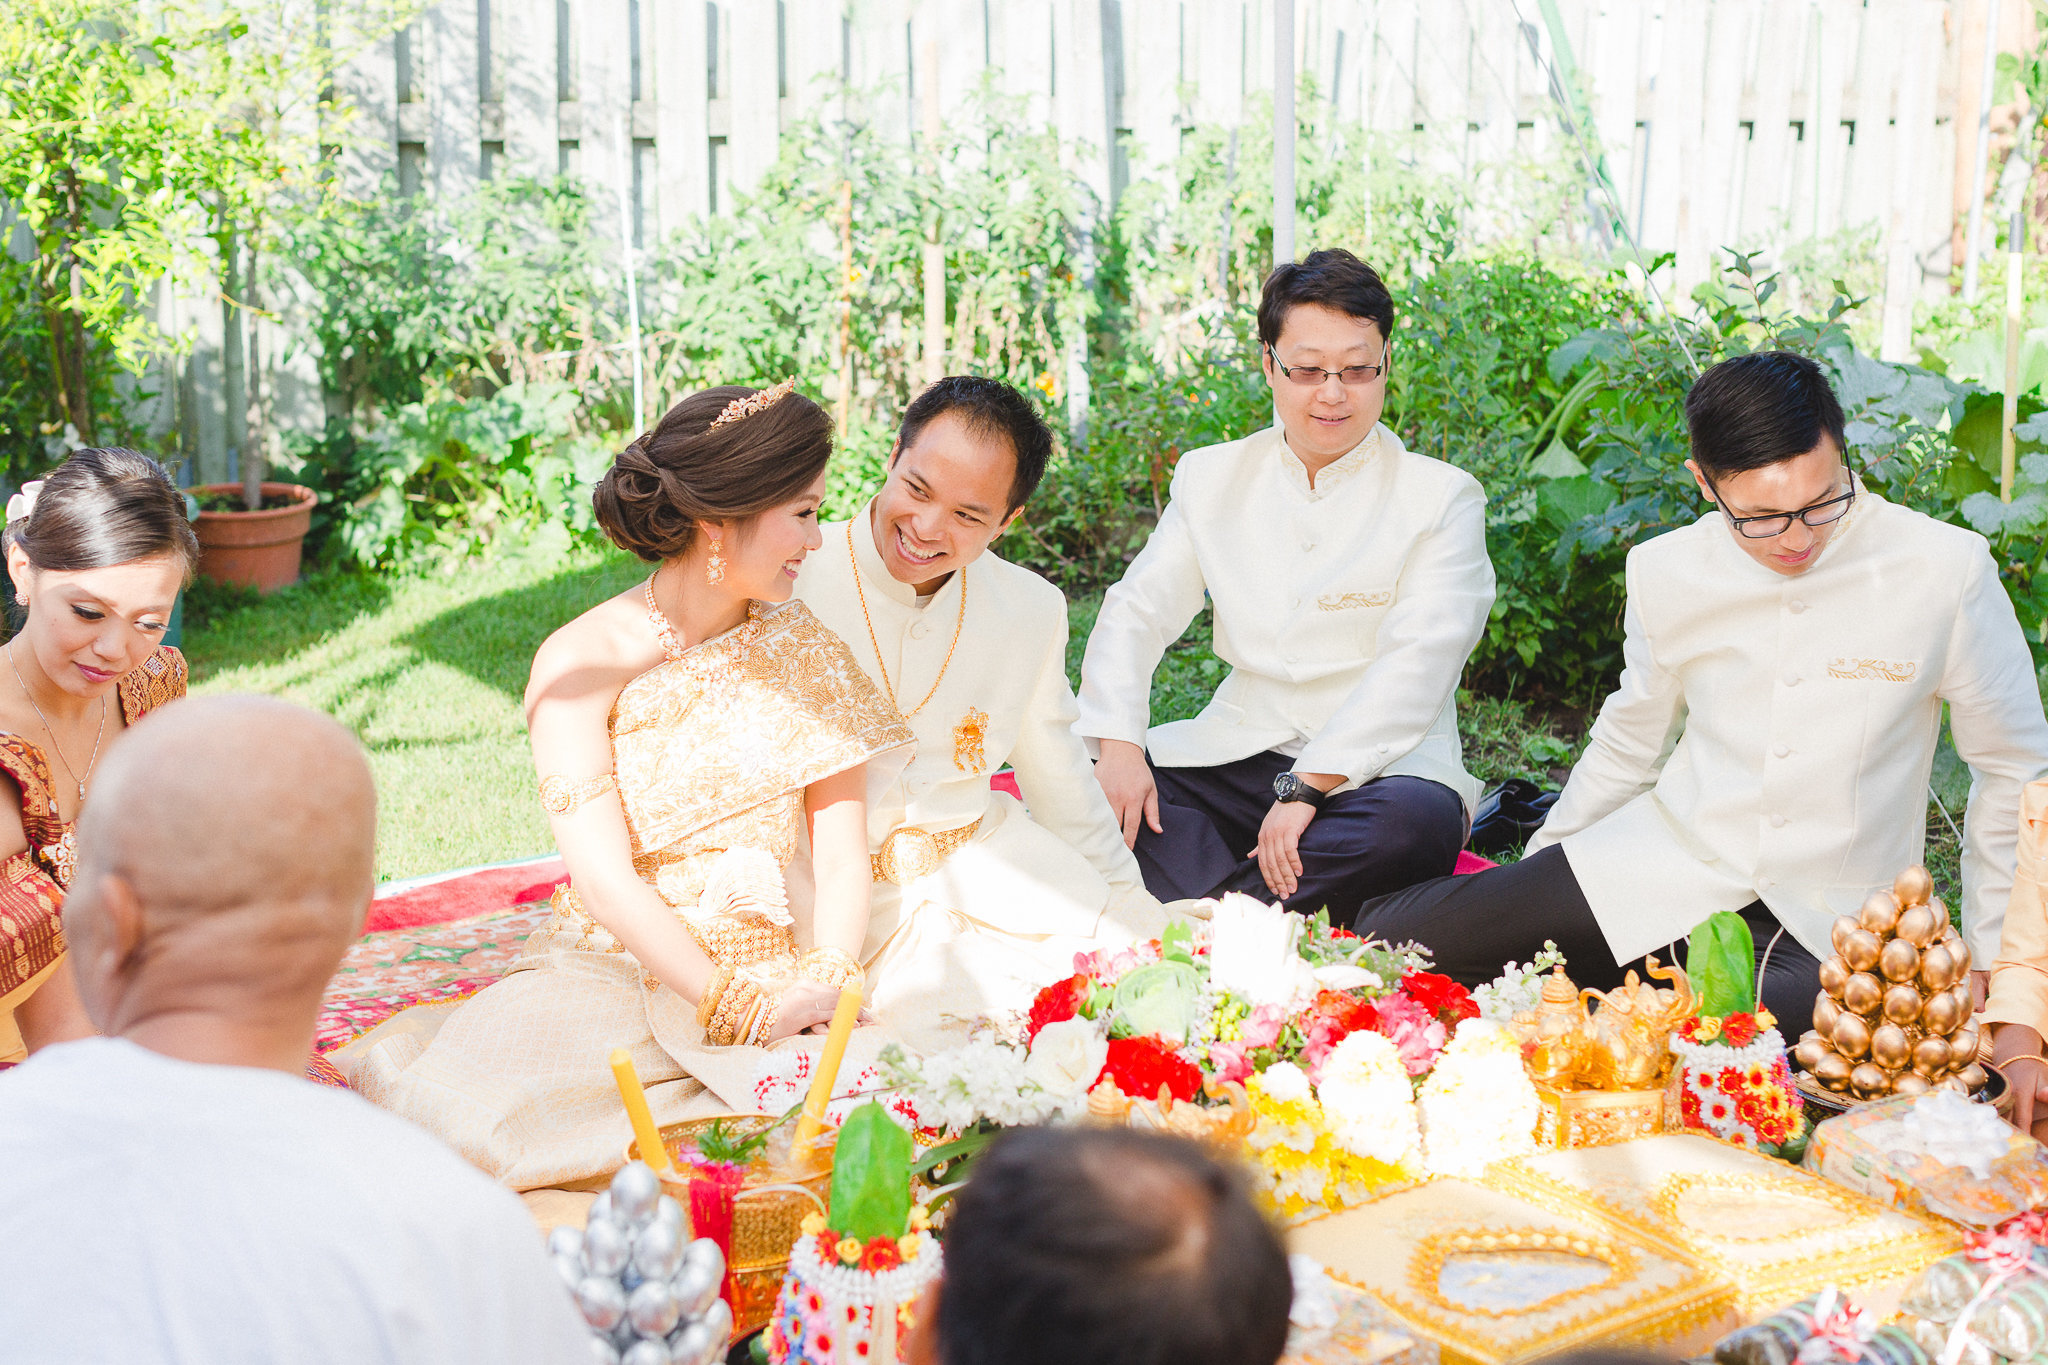 photographe-montreal-mariage-culturel-traditionnel-cambodgien-lisa-renault-photographie-traditional-cultural-cambodian-wedding-28